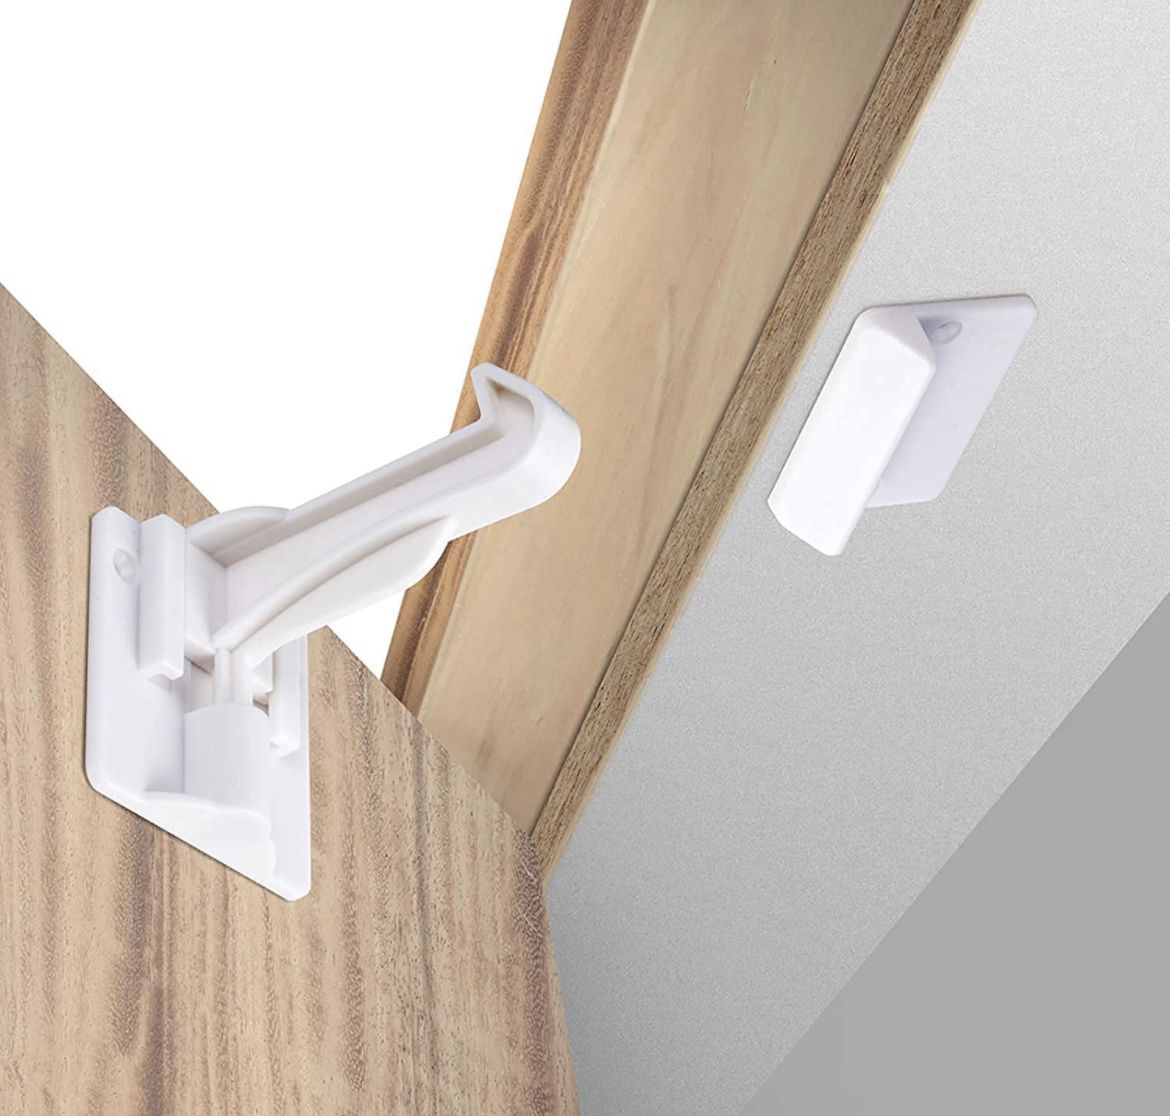 Childproof Cabinet Latches - 3 Count